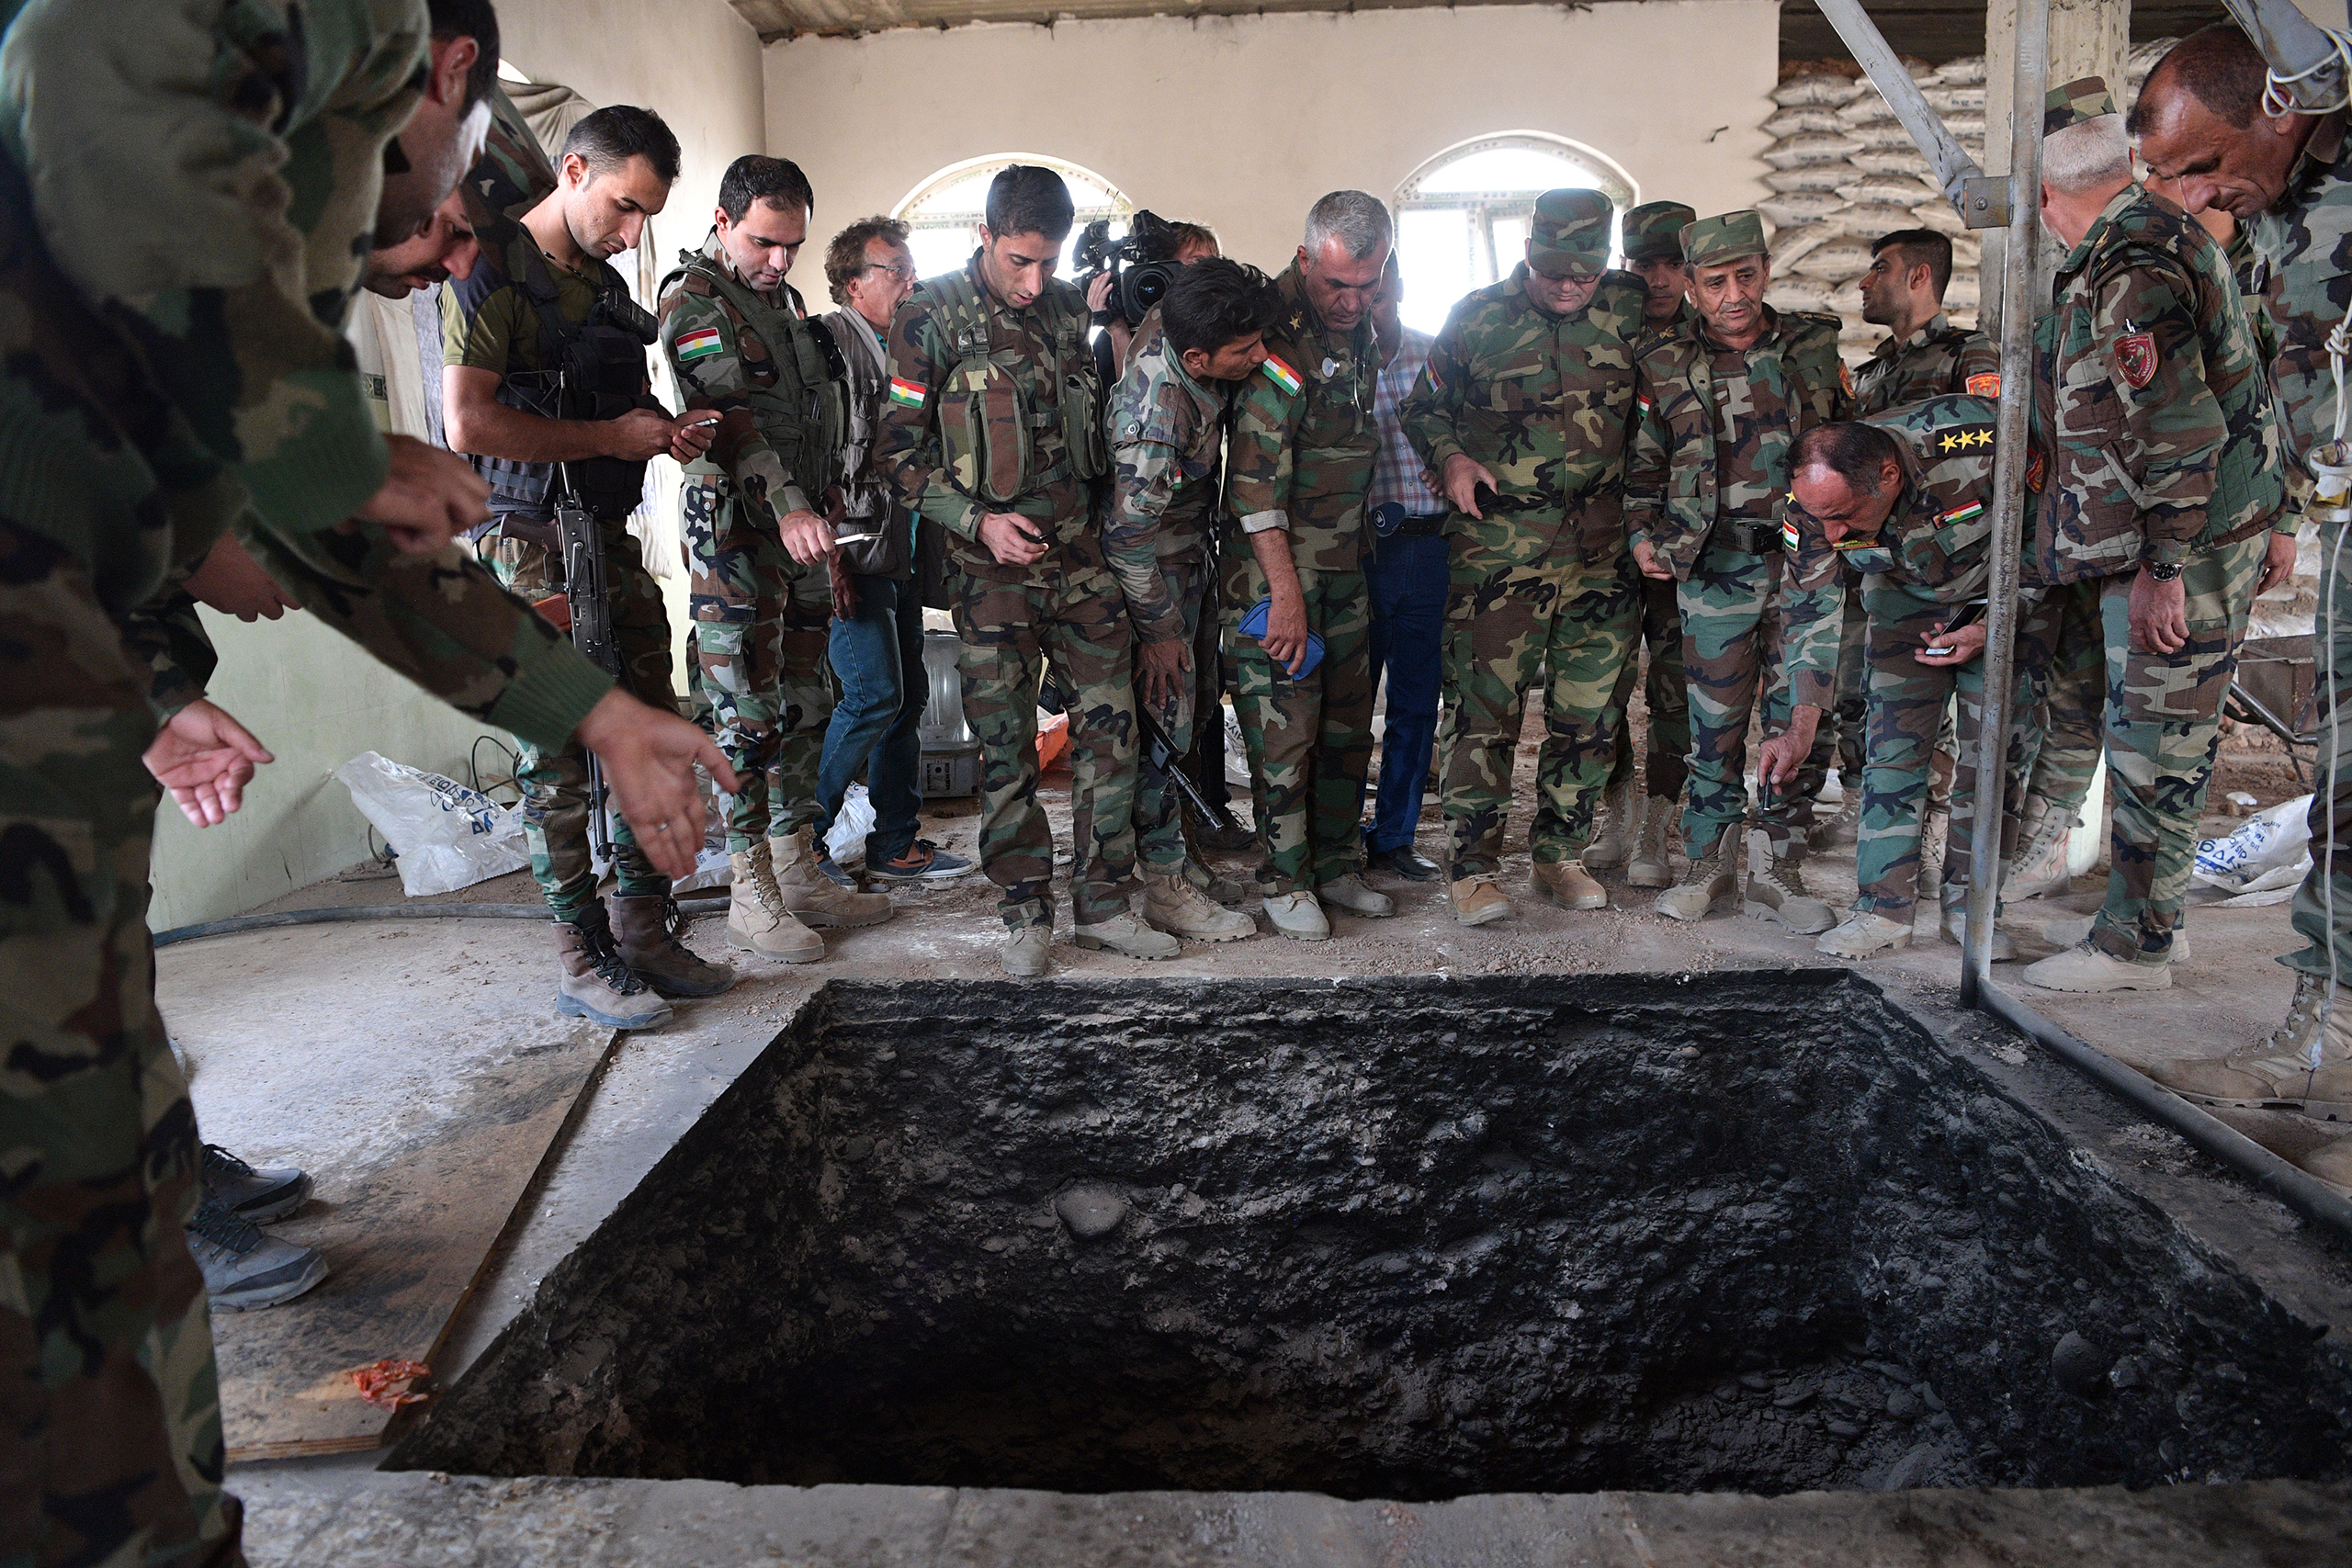 Peshmerga soldiers stand around a tunnel dug by ISIS in a house in Bartella, Iraq, recently recaptured by the Kurds during the battle to retake Mosul on Oct. 18, 2016. (Carl Court—Getty Images)